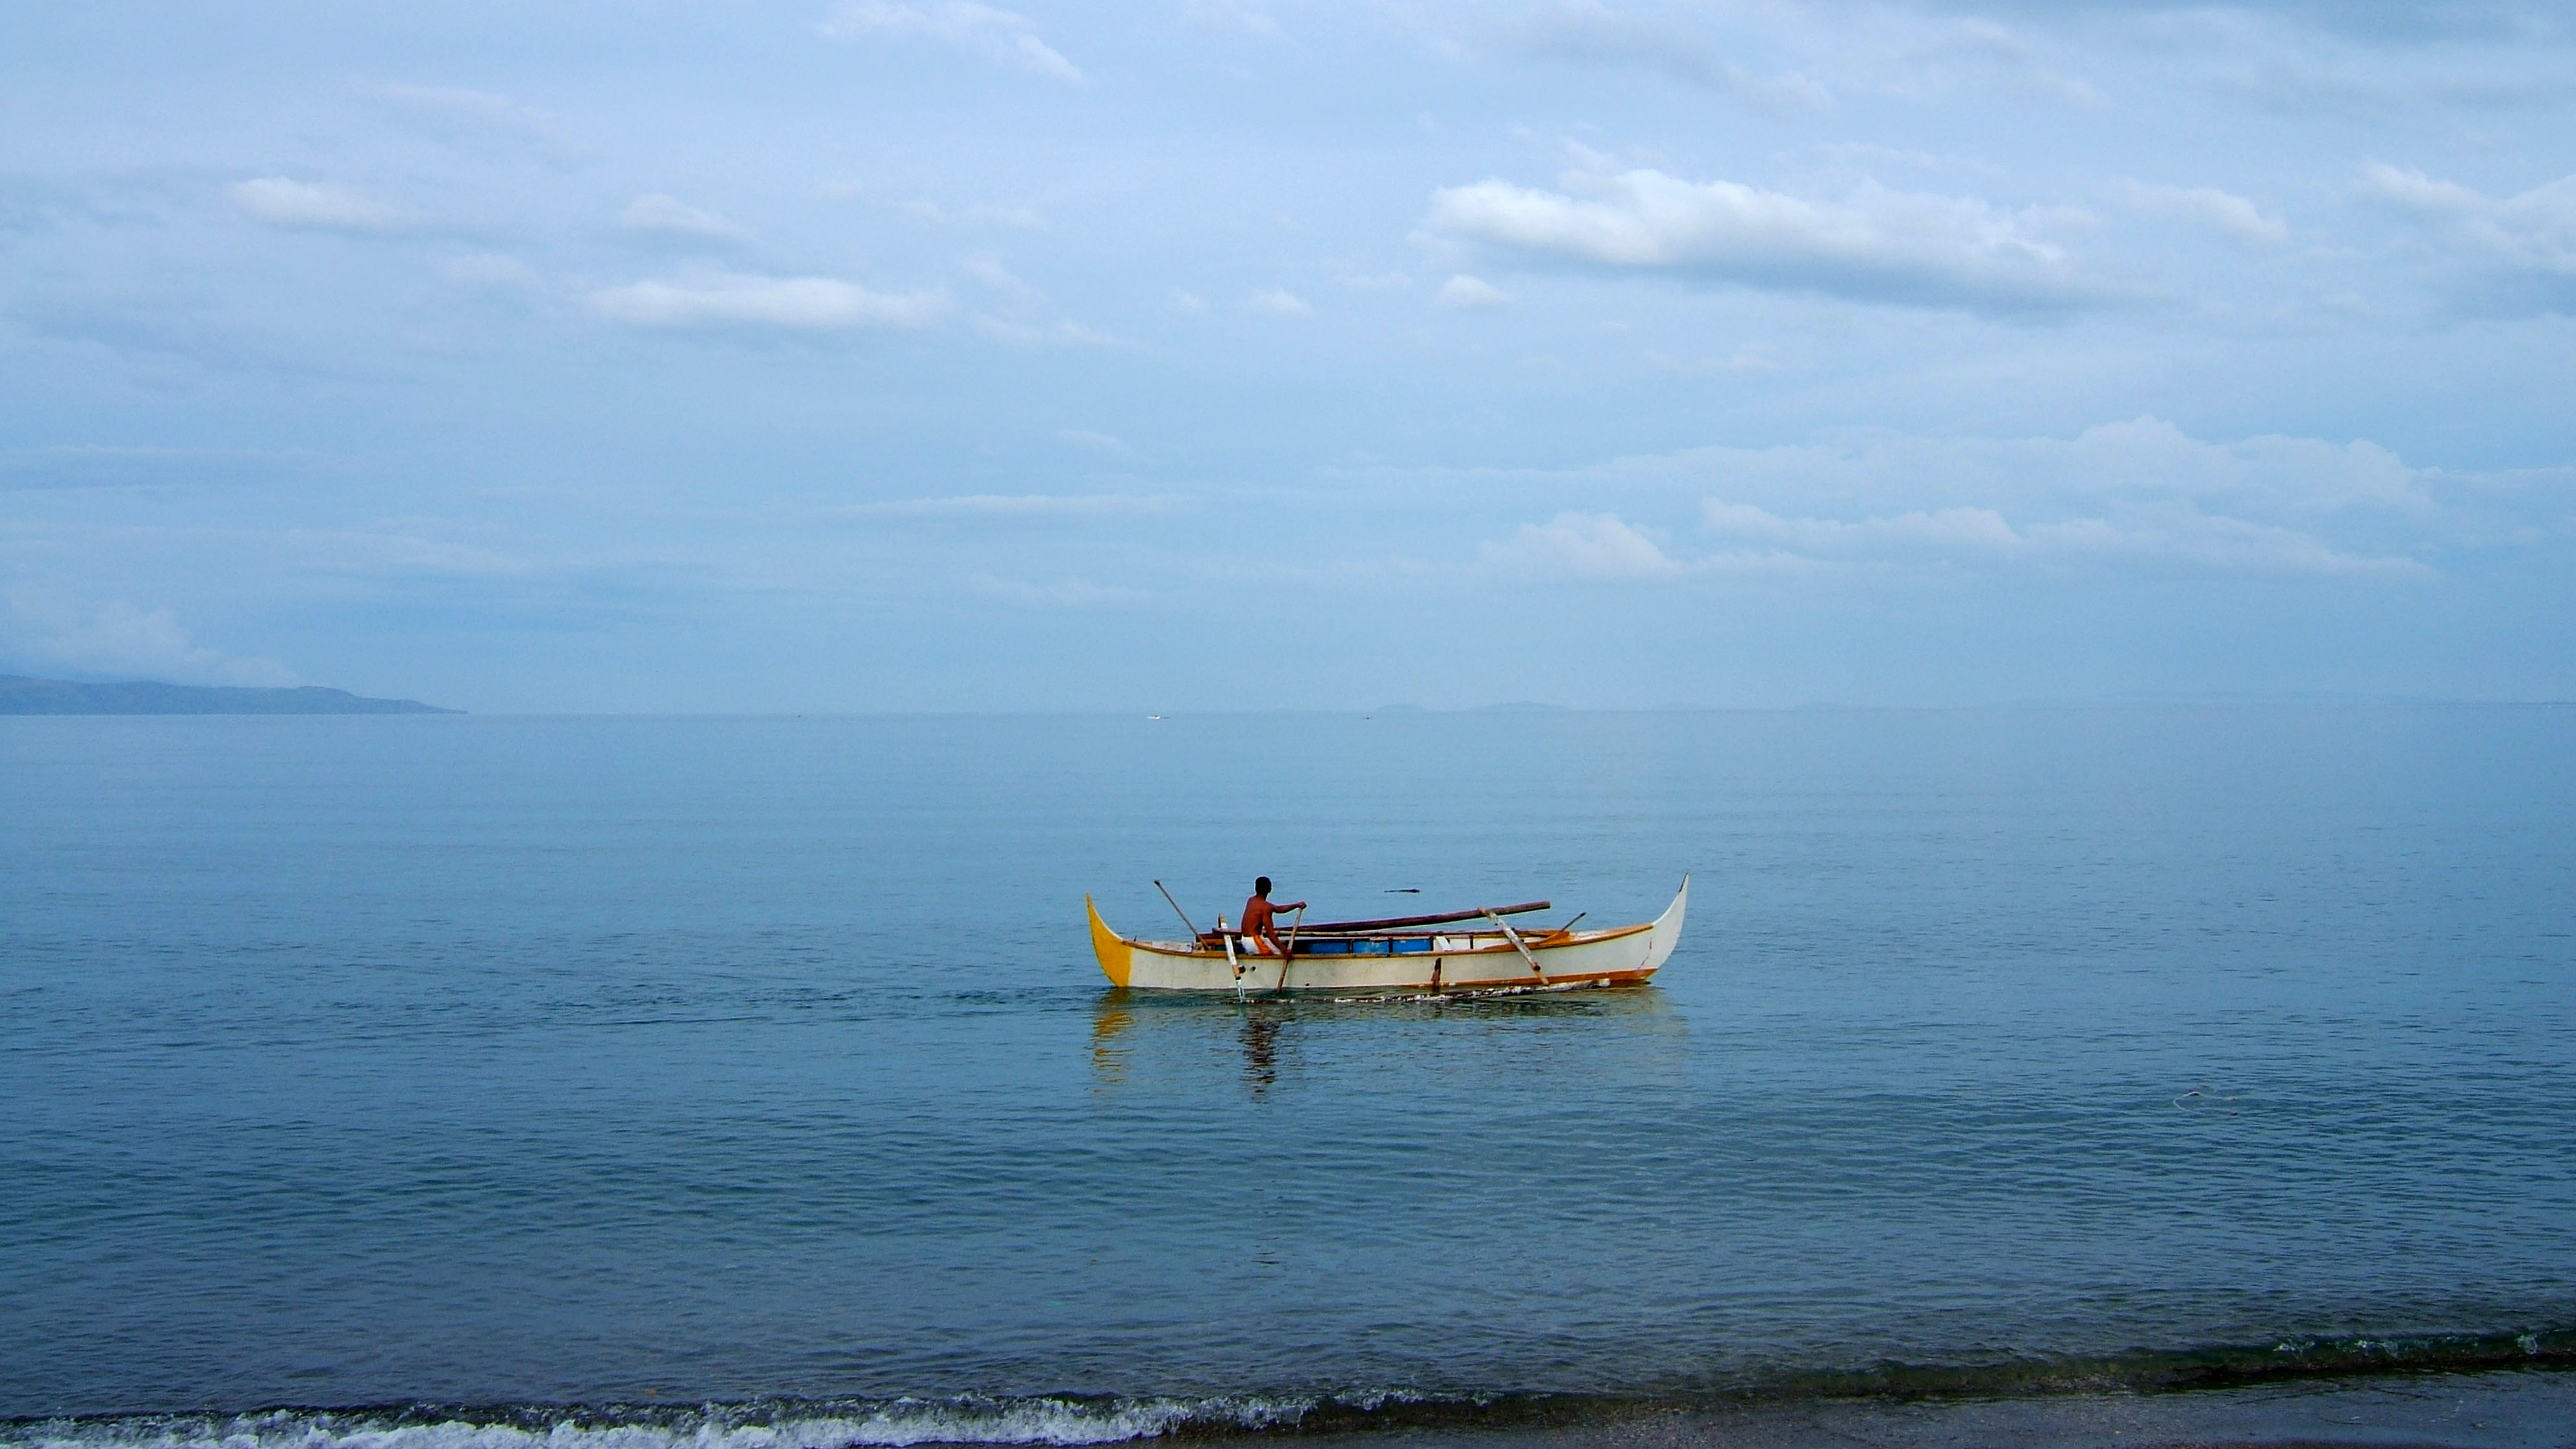 How Typhoon Haiyan Devastated One Village’s Fishing “Fleet” – and what it will take to recover